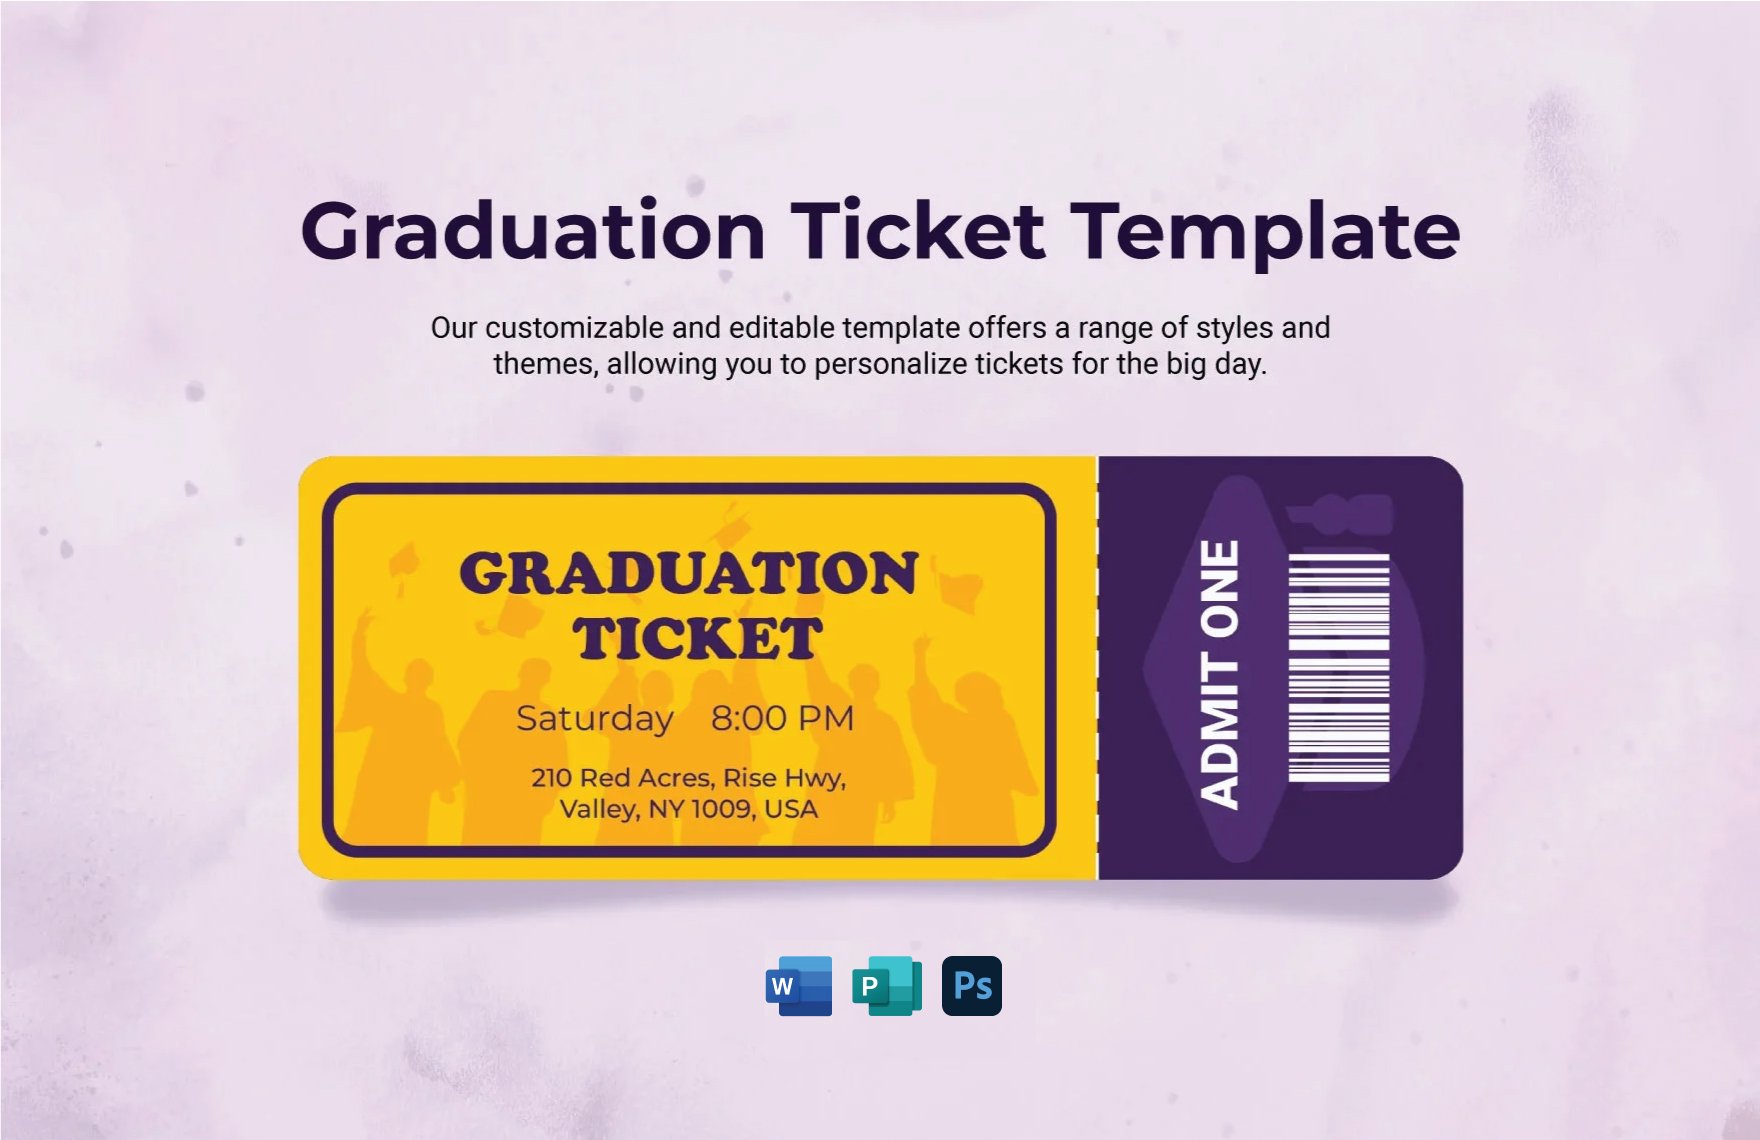 Graduation Ticket Template in Word, PSD, Publisher